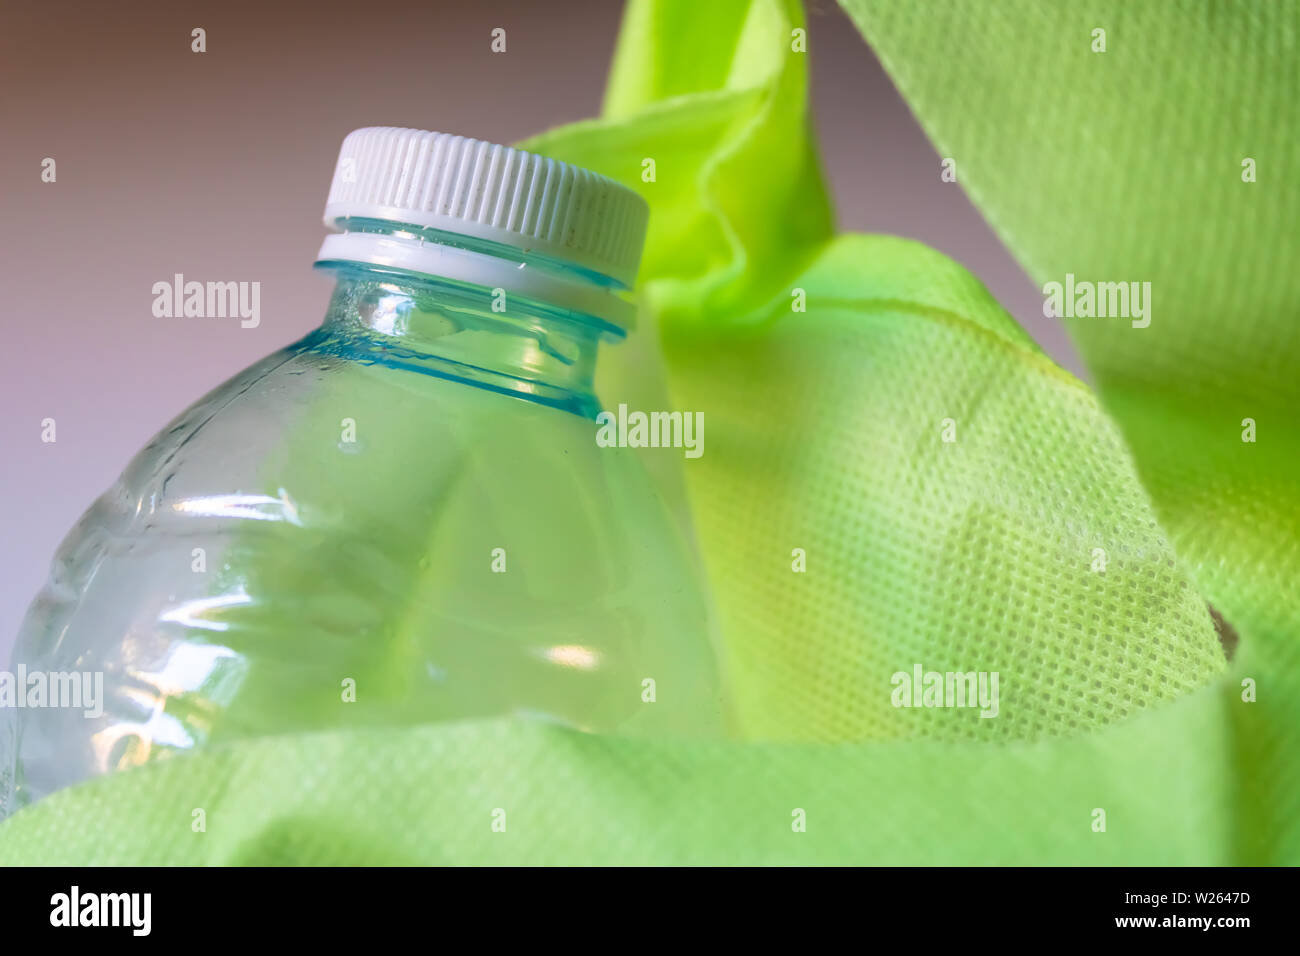 Plastic bottle with the cap inside the reusable green shopping bag - Image Stock Photo